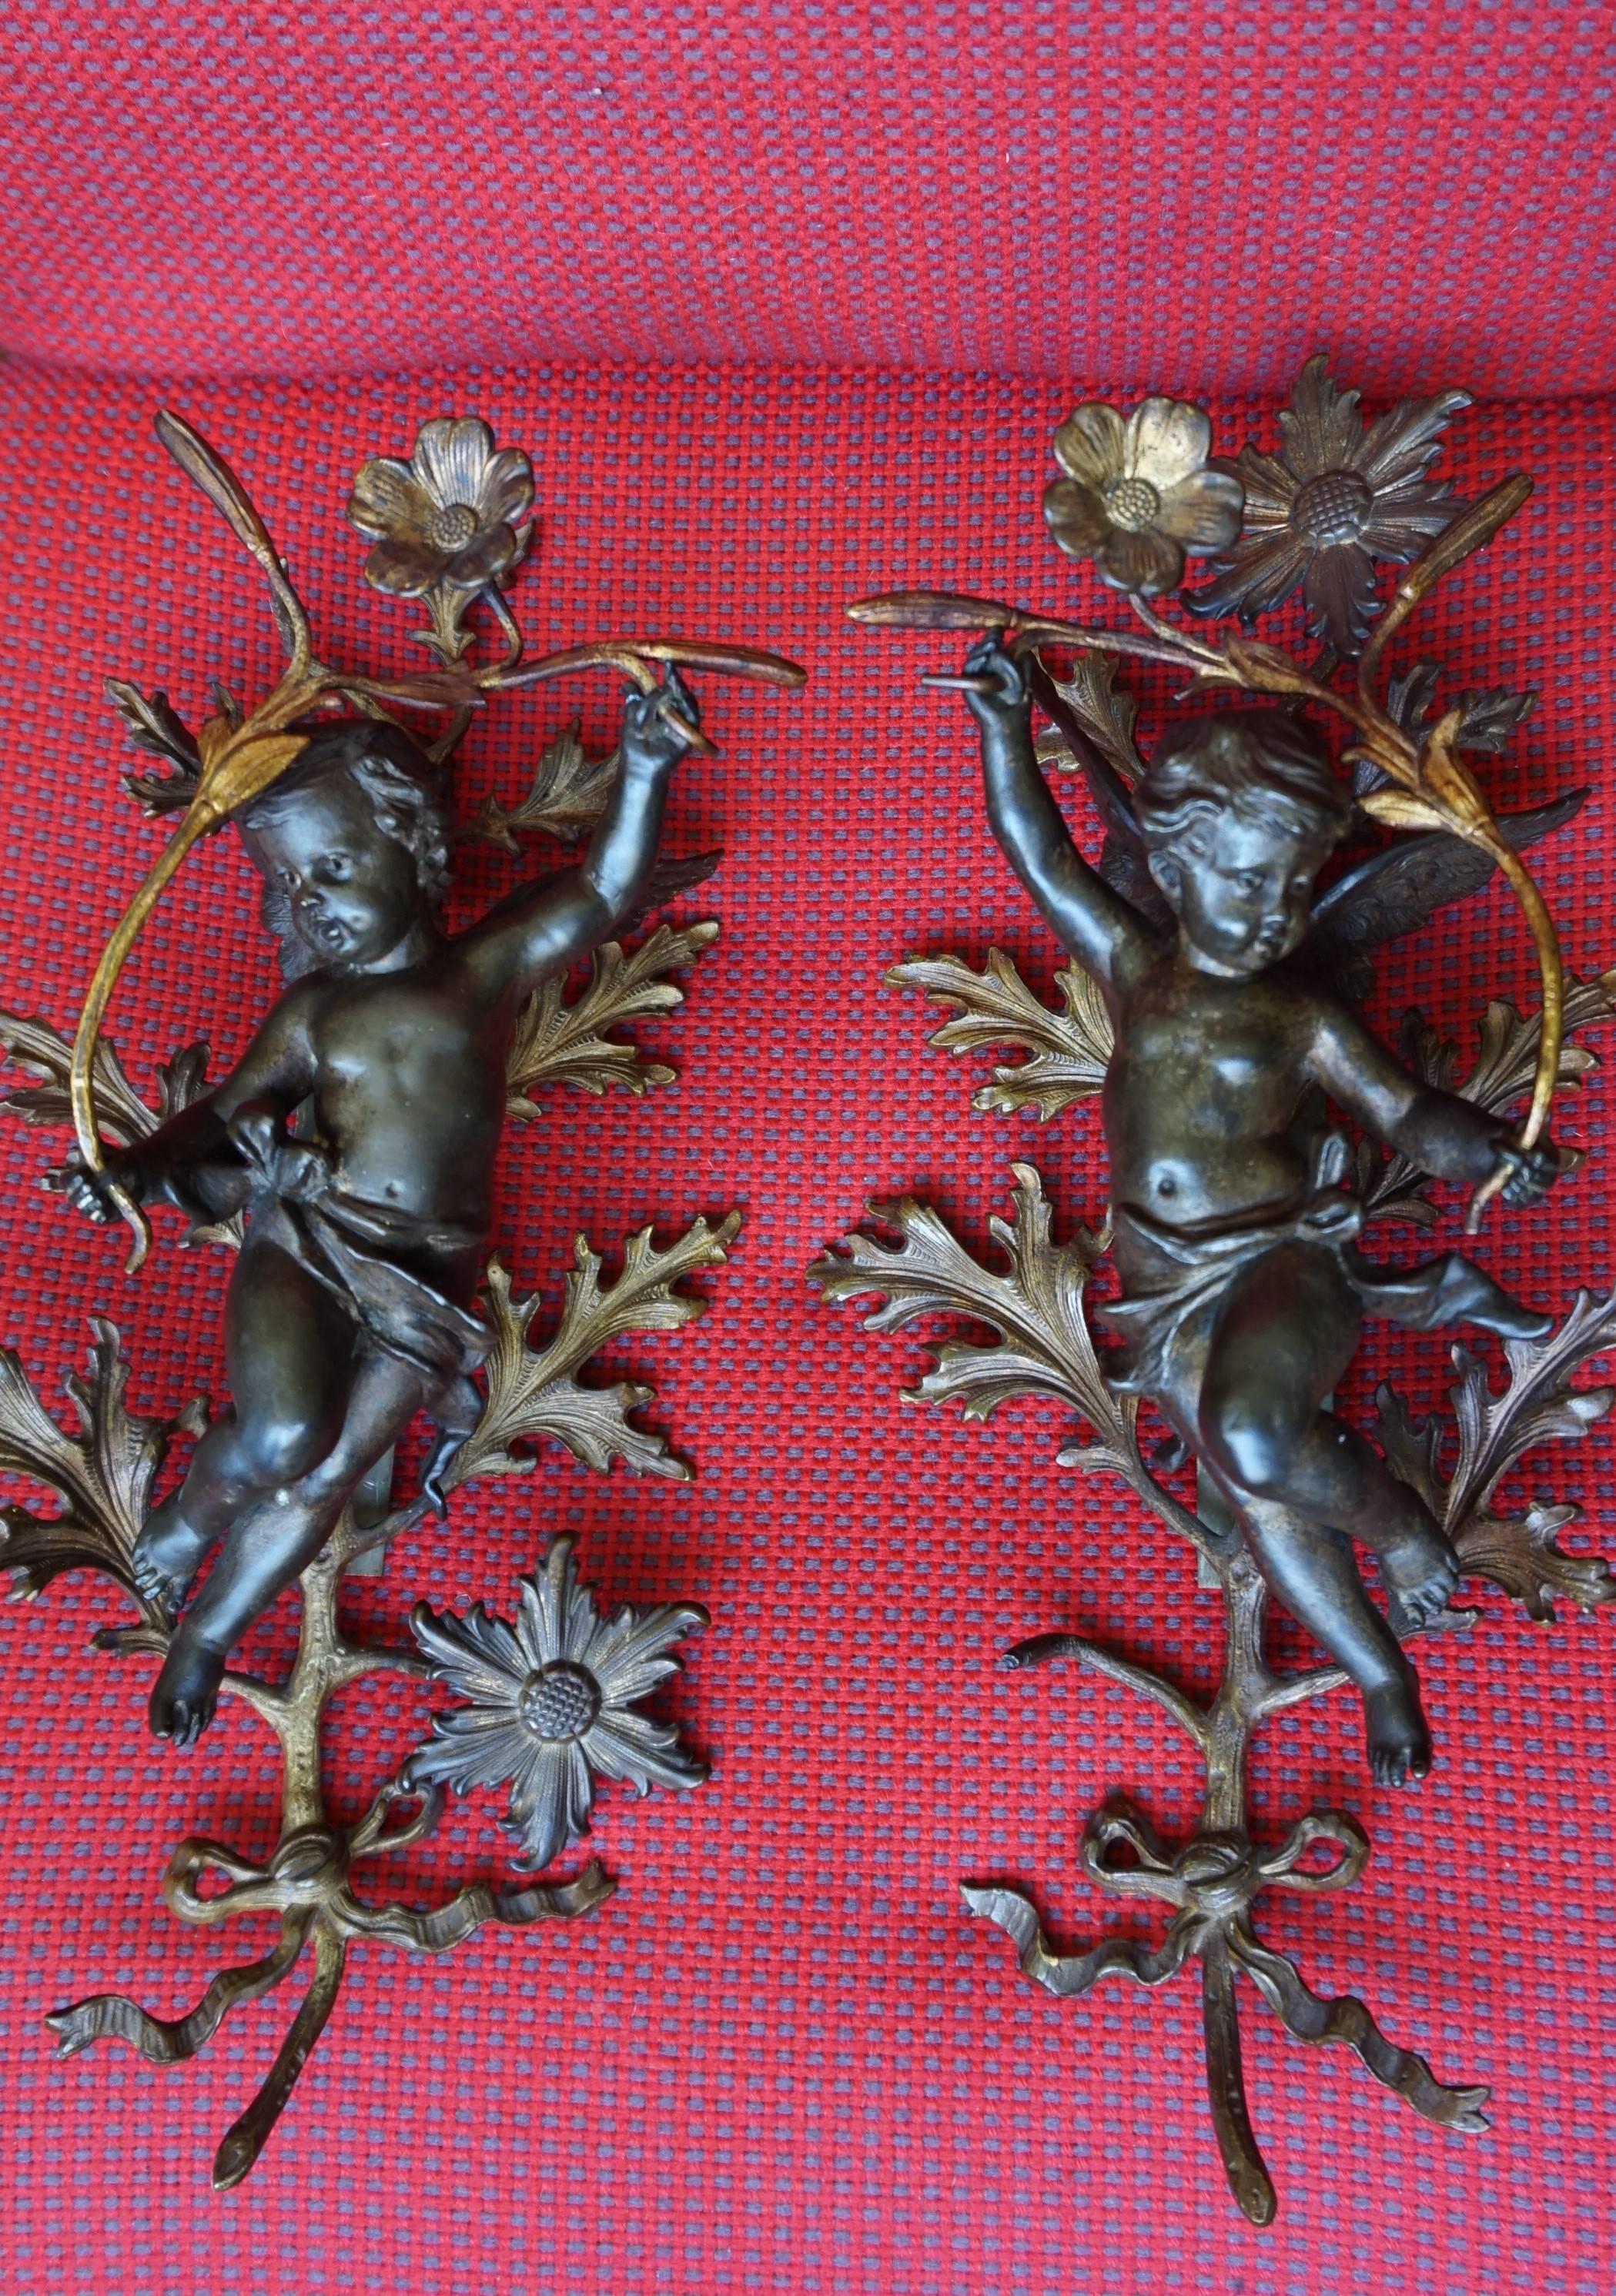 Very fine quality and highly decorative angel sculptures for wall mounting.

These Baroque Revival, metal putti sculptures have the most beautiful patina and the details of these little boy angels are truly beautiful. The artist must have studied